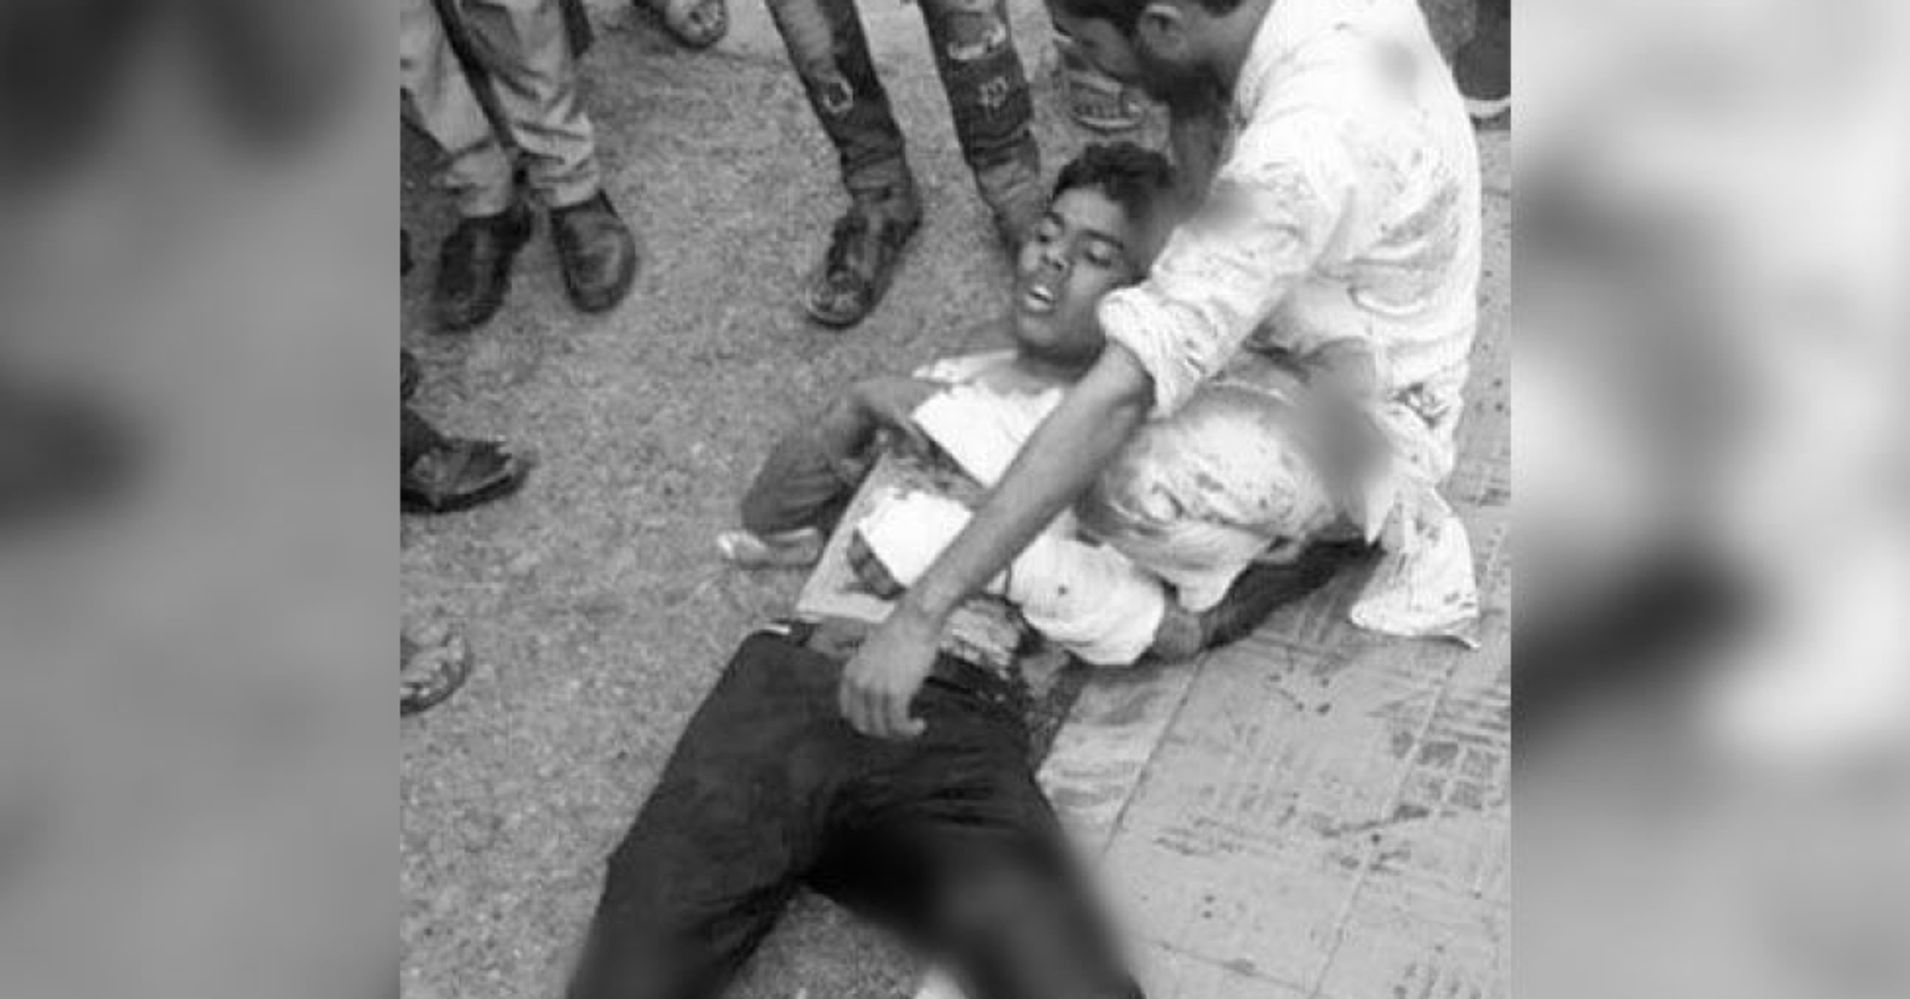 mob lynching in india research paper